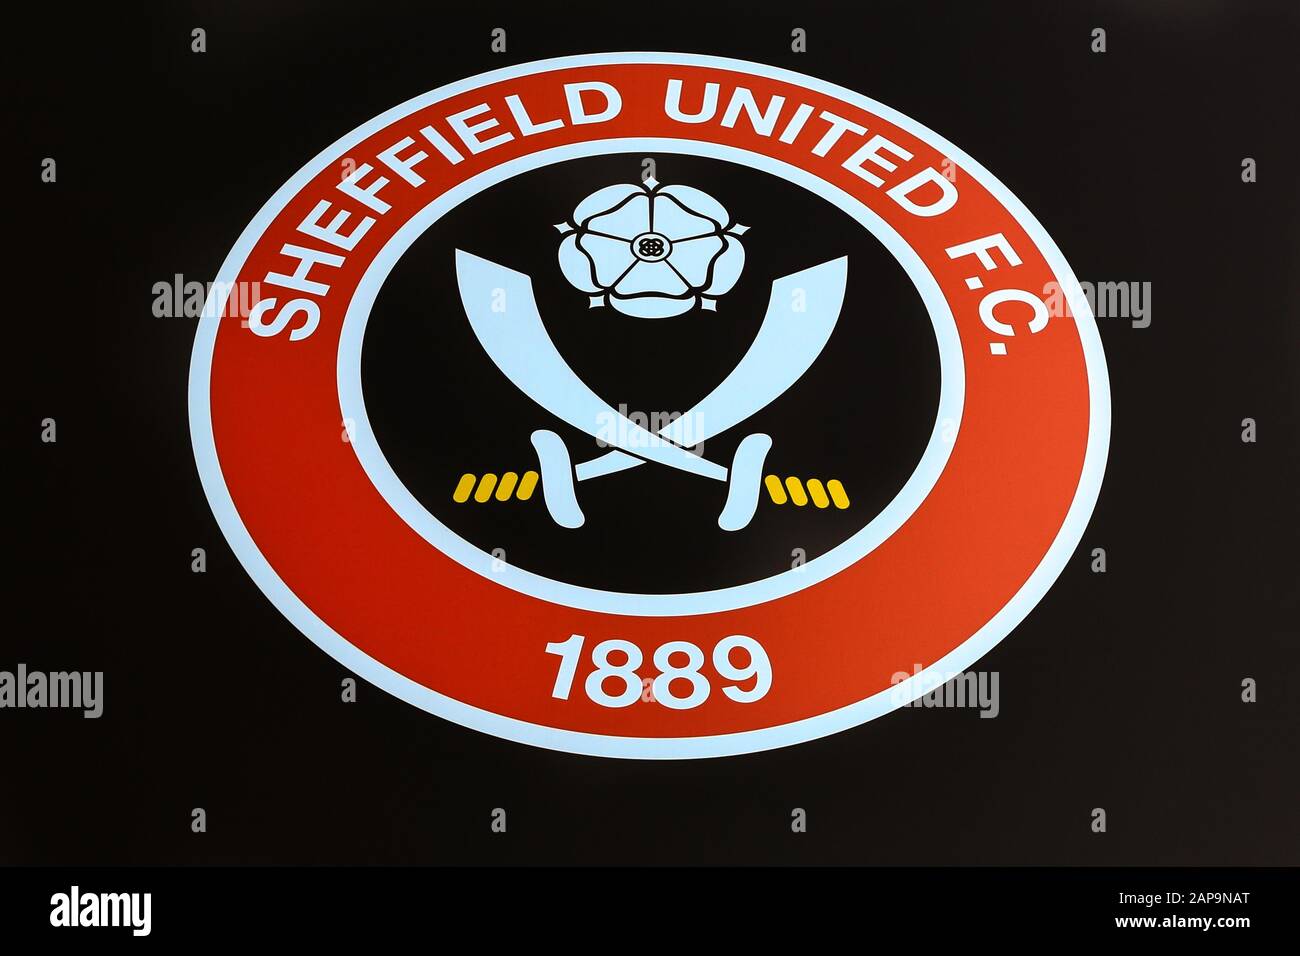 Sheffield FA ⚽️ on X: ❓GUESS THE CLUB BADGE❓ How well do you